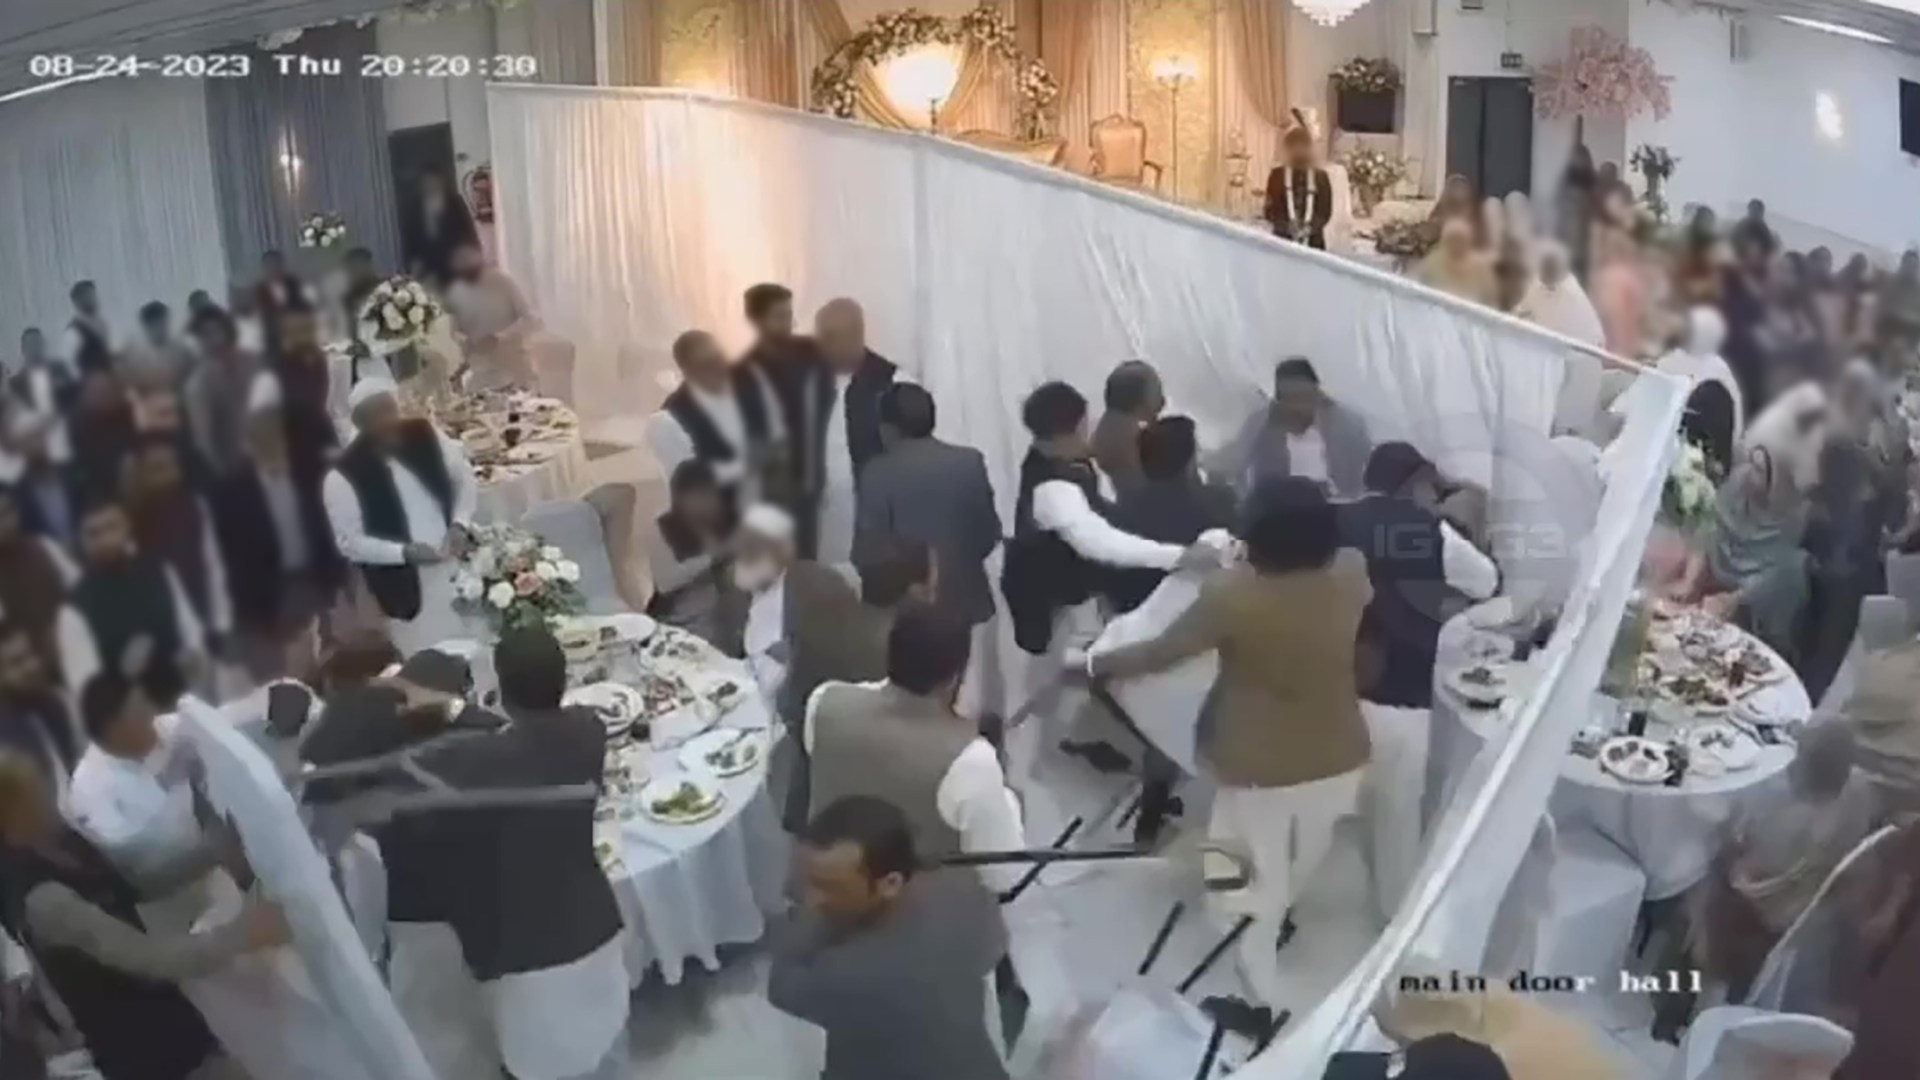 Chaotic Wedding Brawl: Guests Turn Chairs and Poles into Weapons